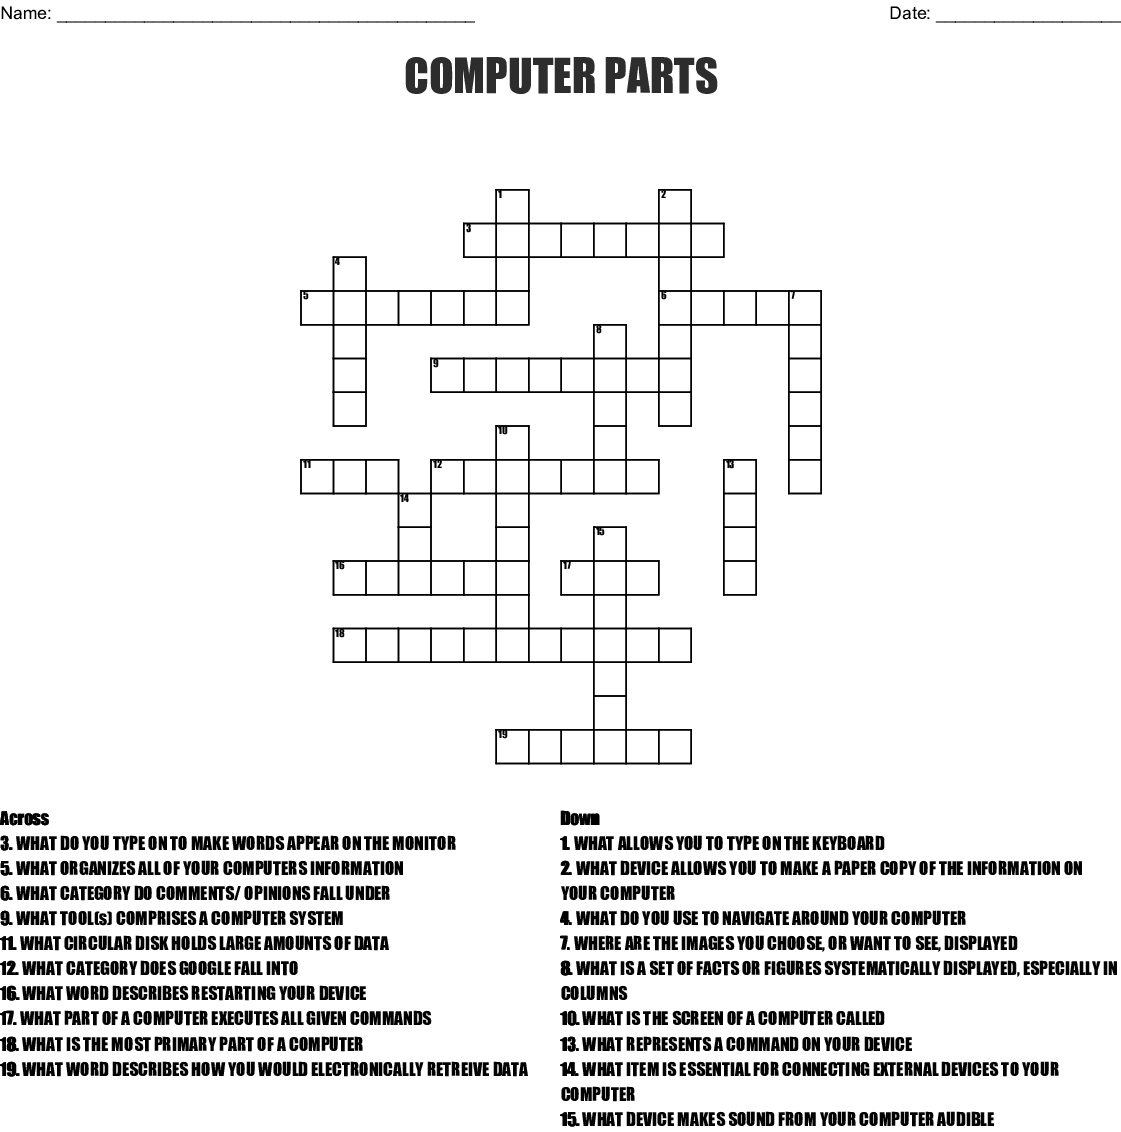 Computer Crossword Puzzle WordMint - Easy To Set Up As A Computer Crossword Clue